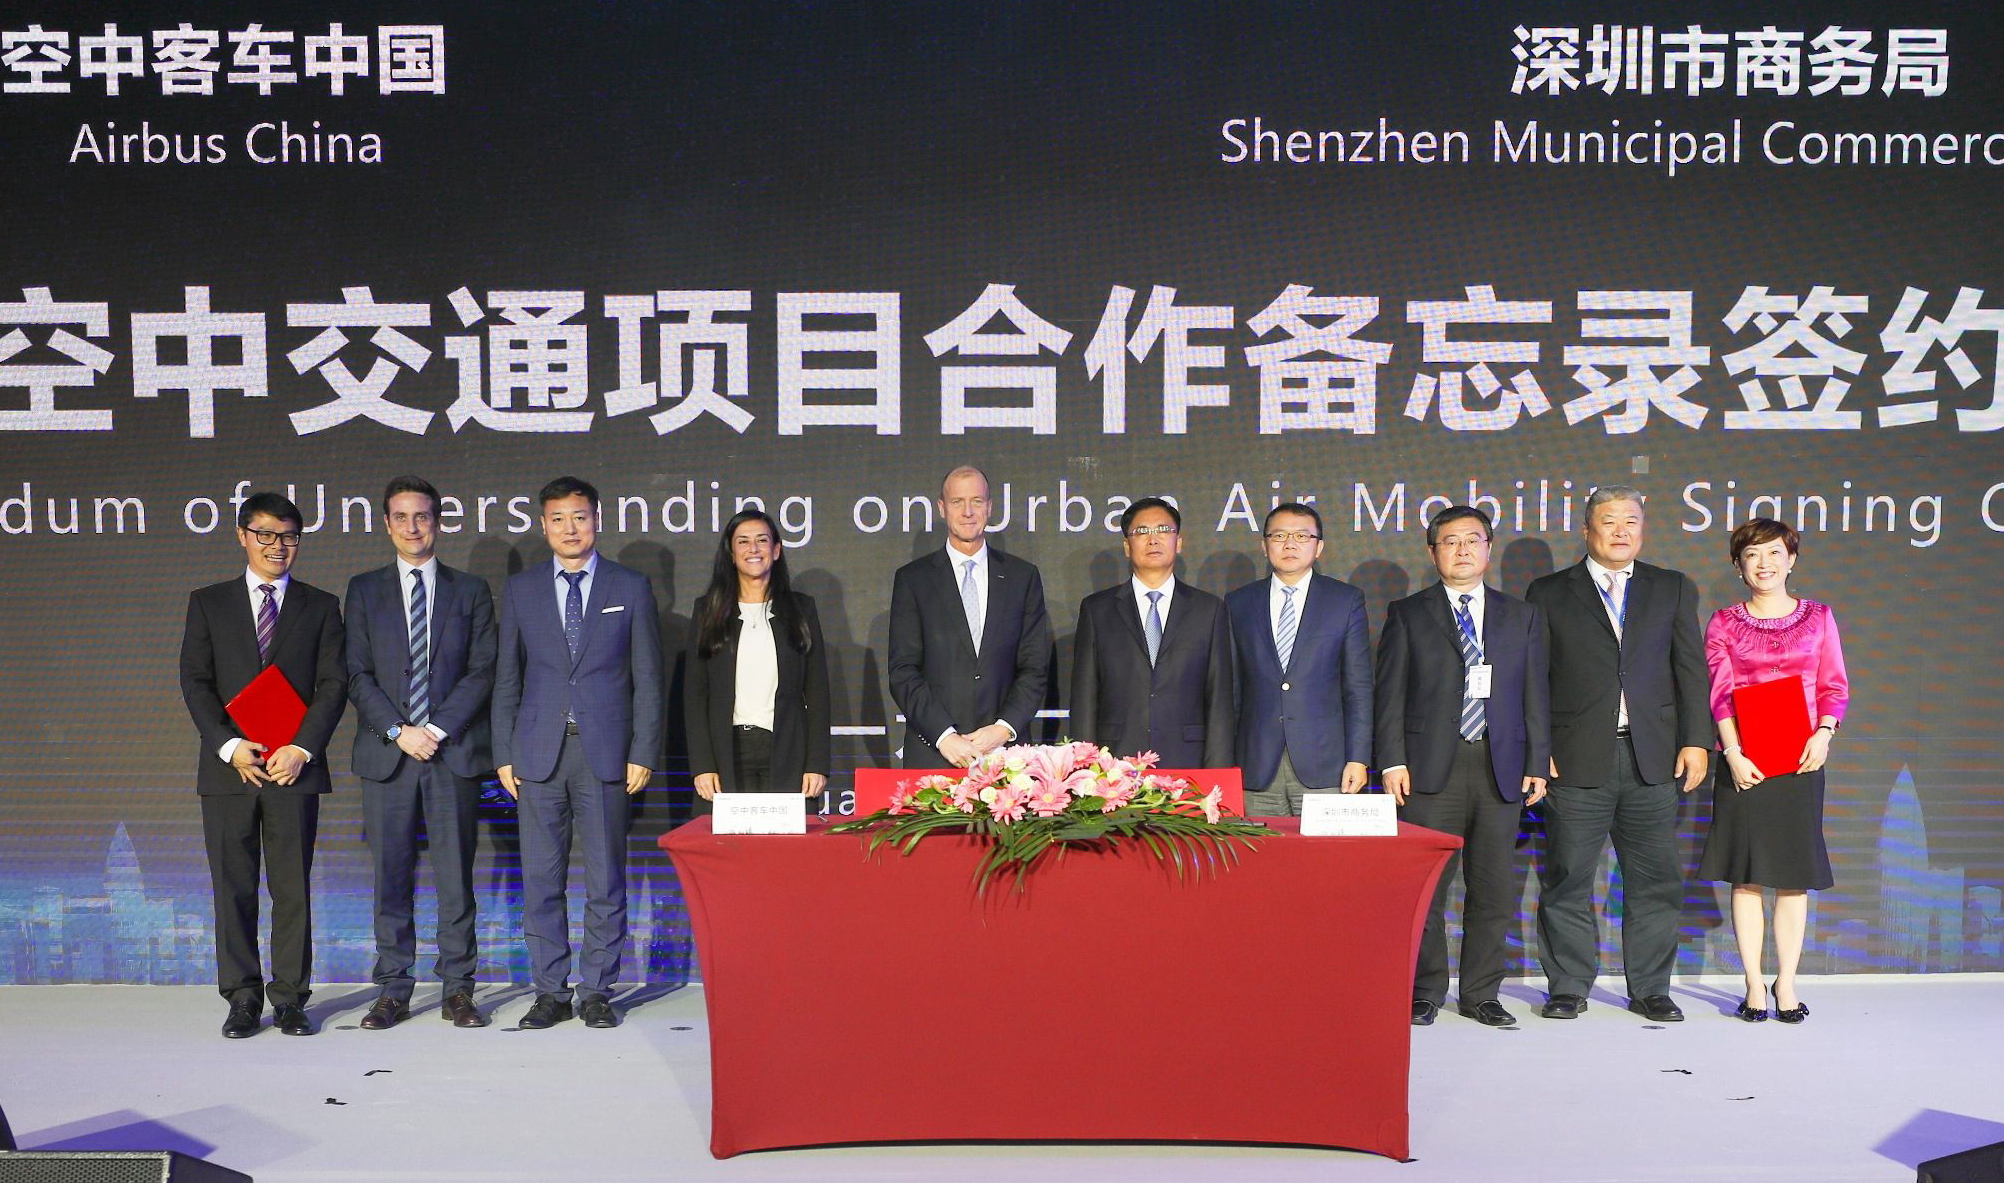 Airbus also signed a Memorandum of Understanding (MoU) with Shenzhen Municipal Commerce Bureau for close collaboration, acceleration, application and industrialization of UAM. With extended regional partners, Airbus aims to further develop the local UAM ecosystem and promote solutions that fit local transportation needs. Click to enlarge.